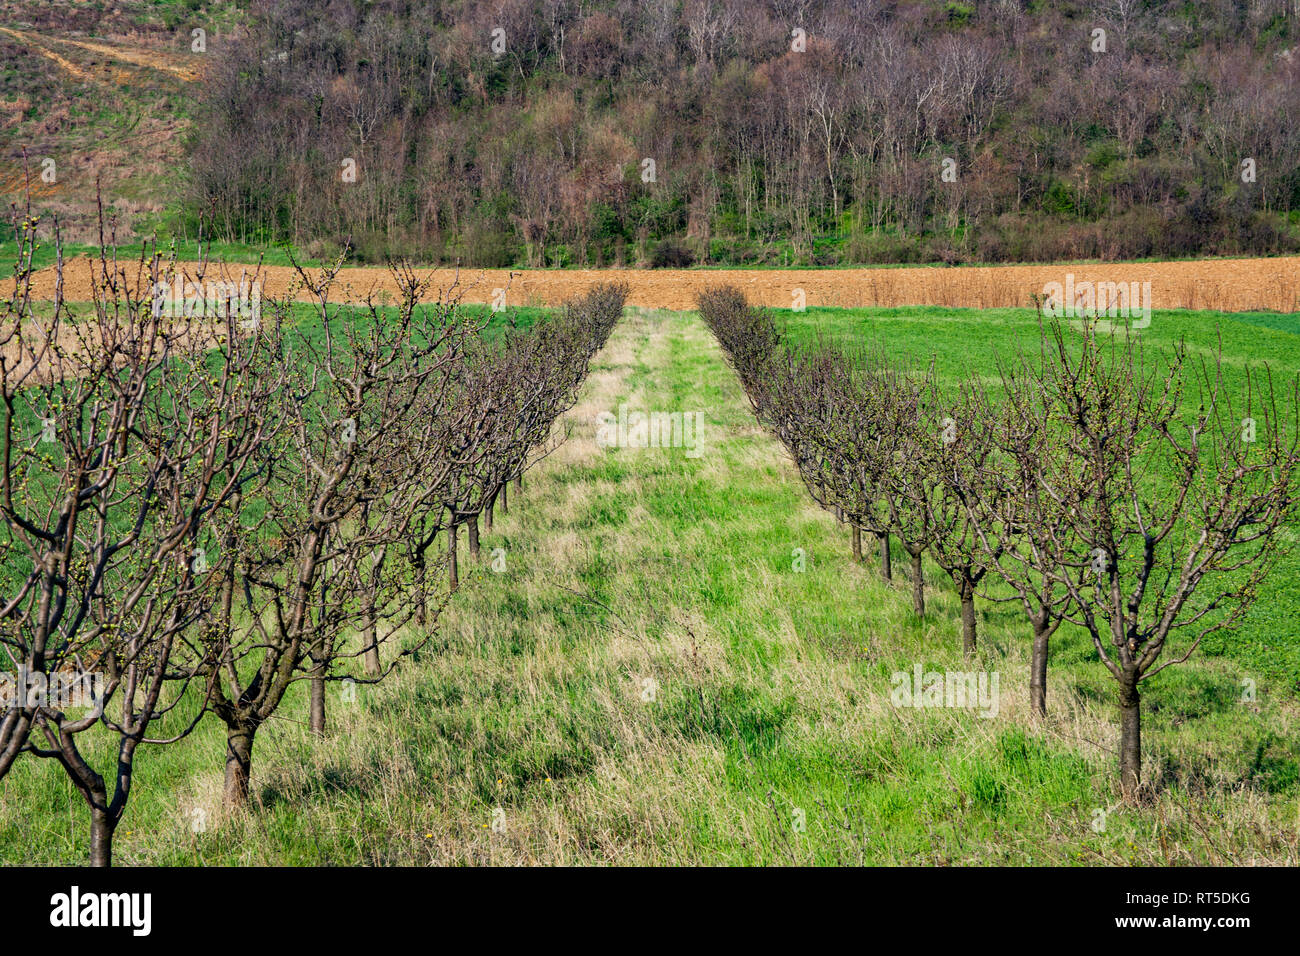 Beautiful arable land in Vojvodina, orchards and agricultural land near the Fruska Gora, Serbia fertile ground Stock Photo